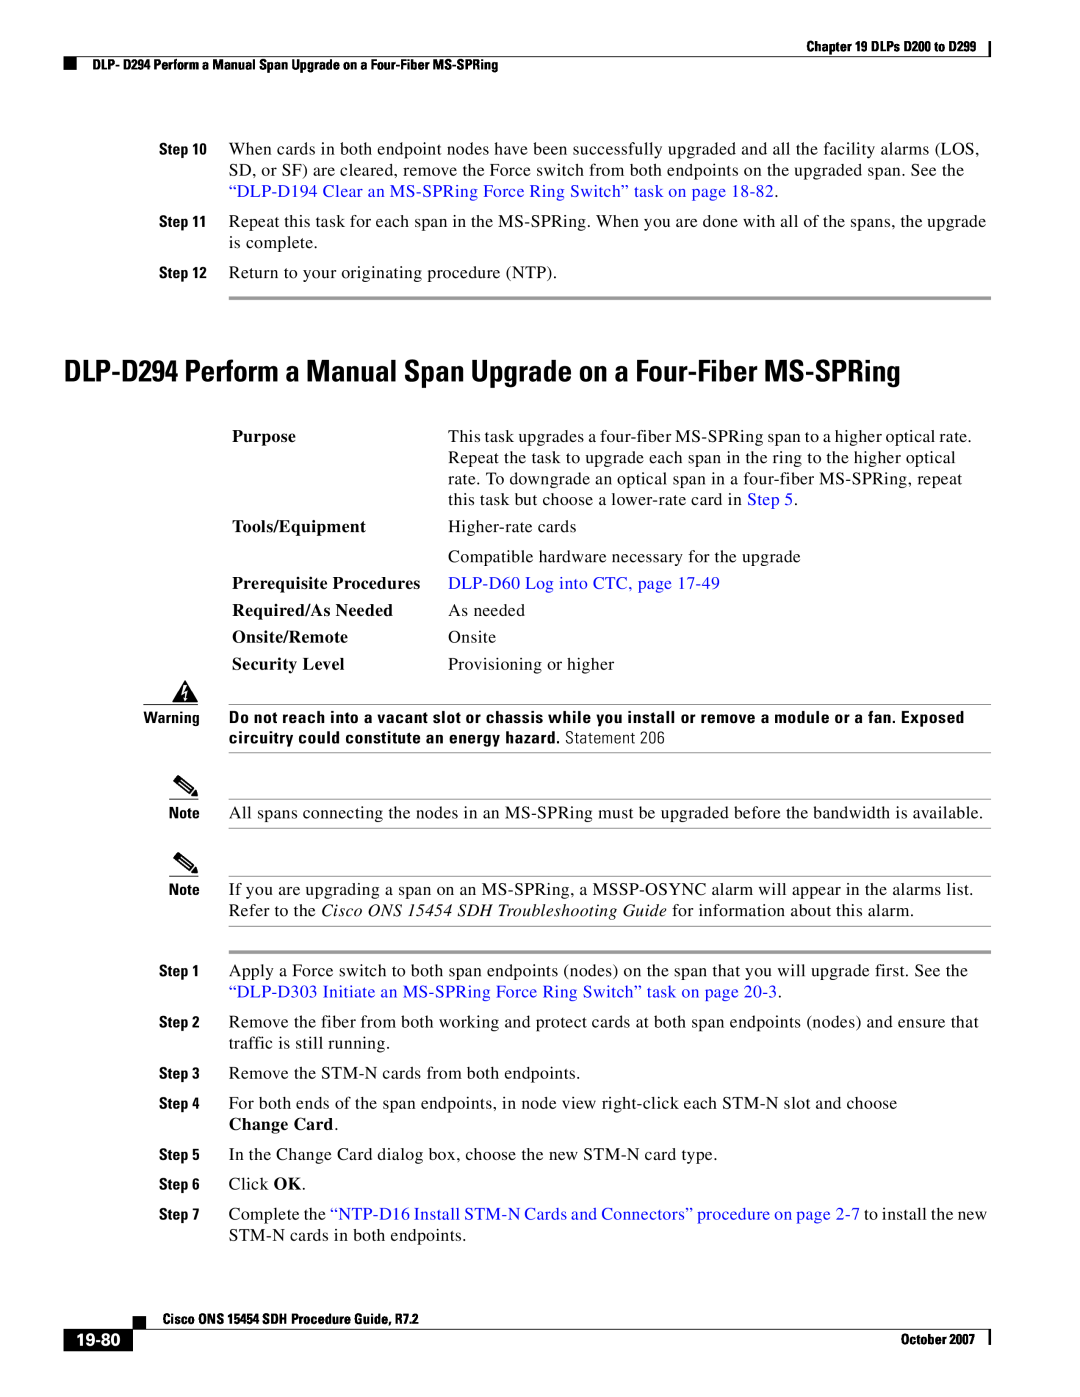 Cisco Systems D200 manual DLP-D294 Perform a Manual Span Upgrade on a Four-Fiber MS-SPRing, 19-80, Purpose, Tools/Equipment 